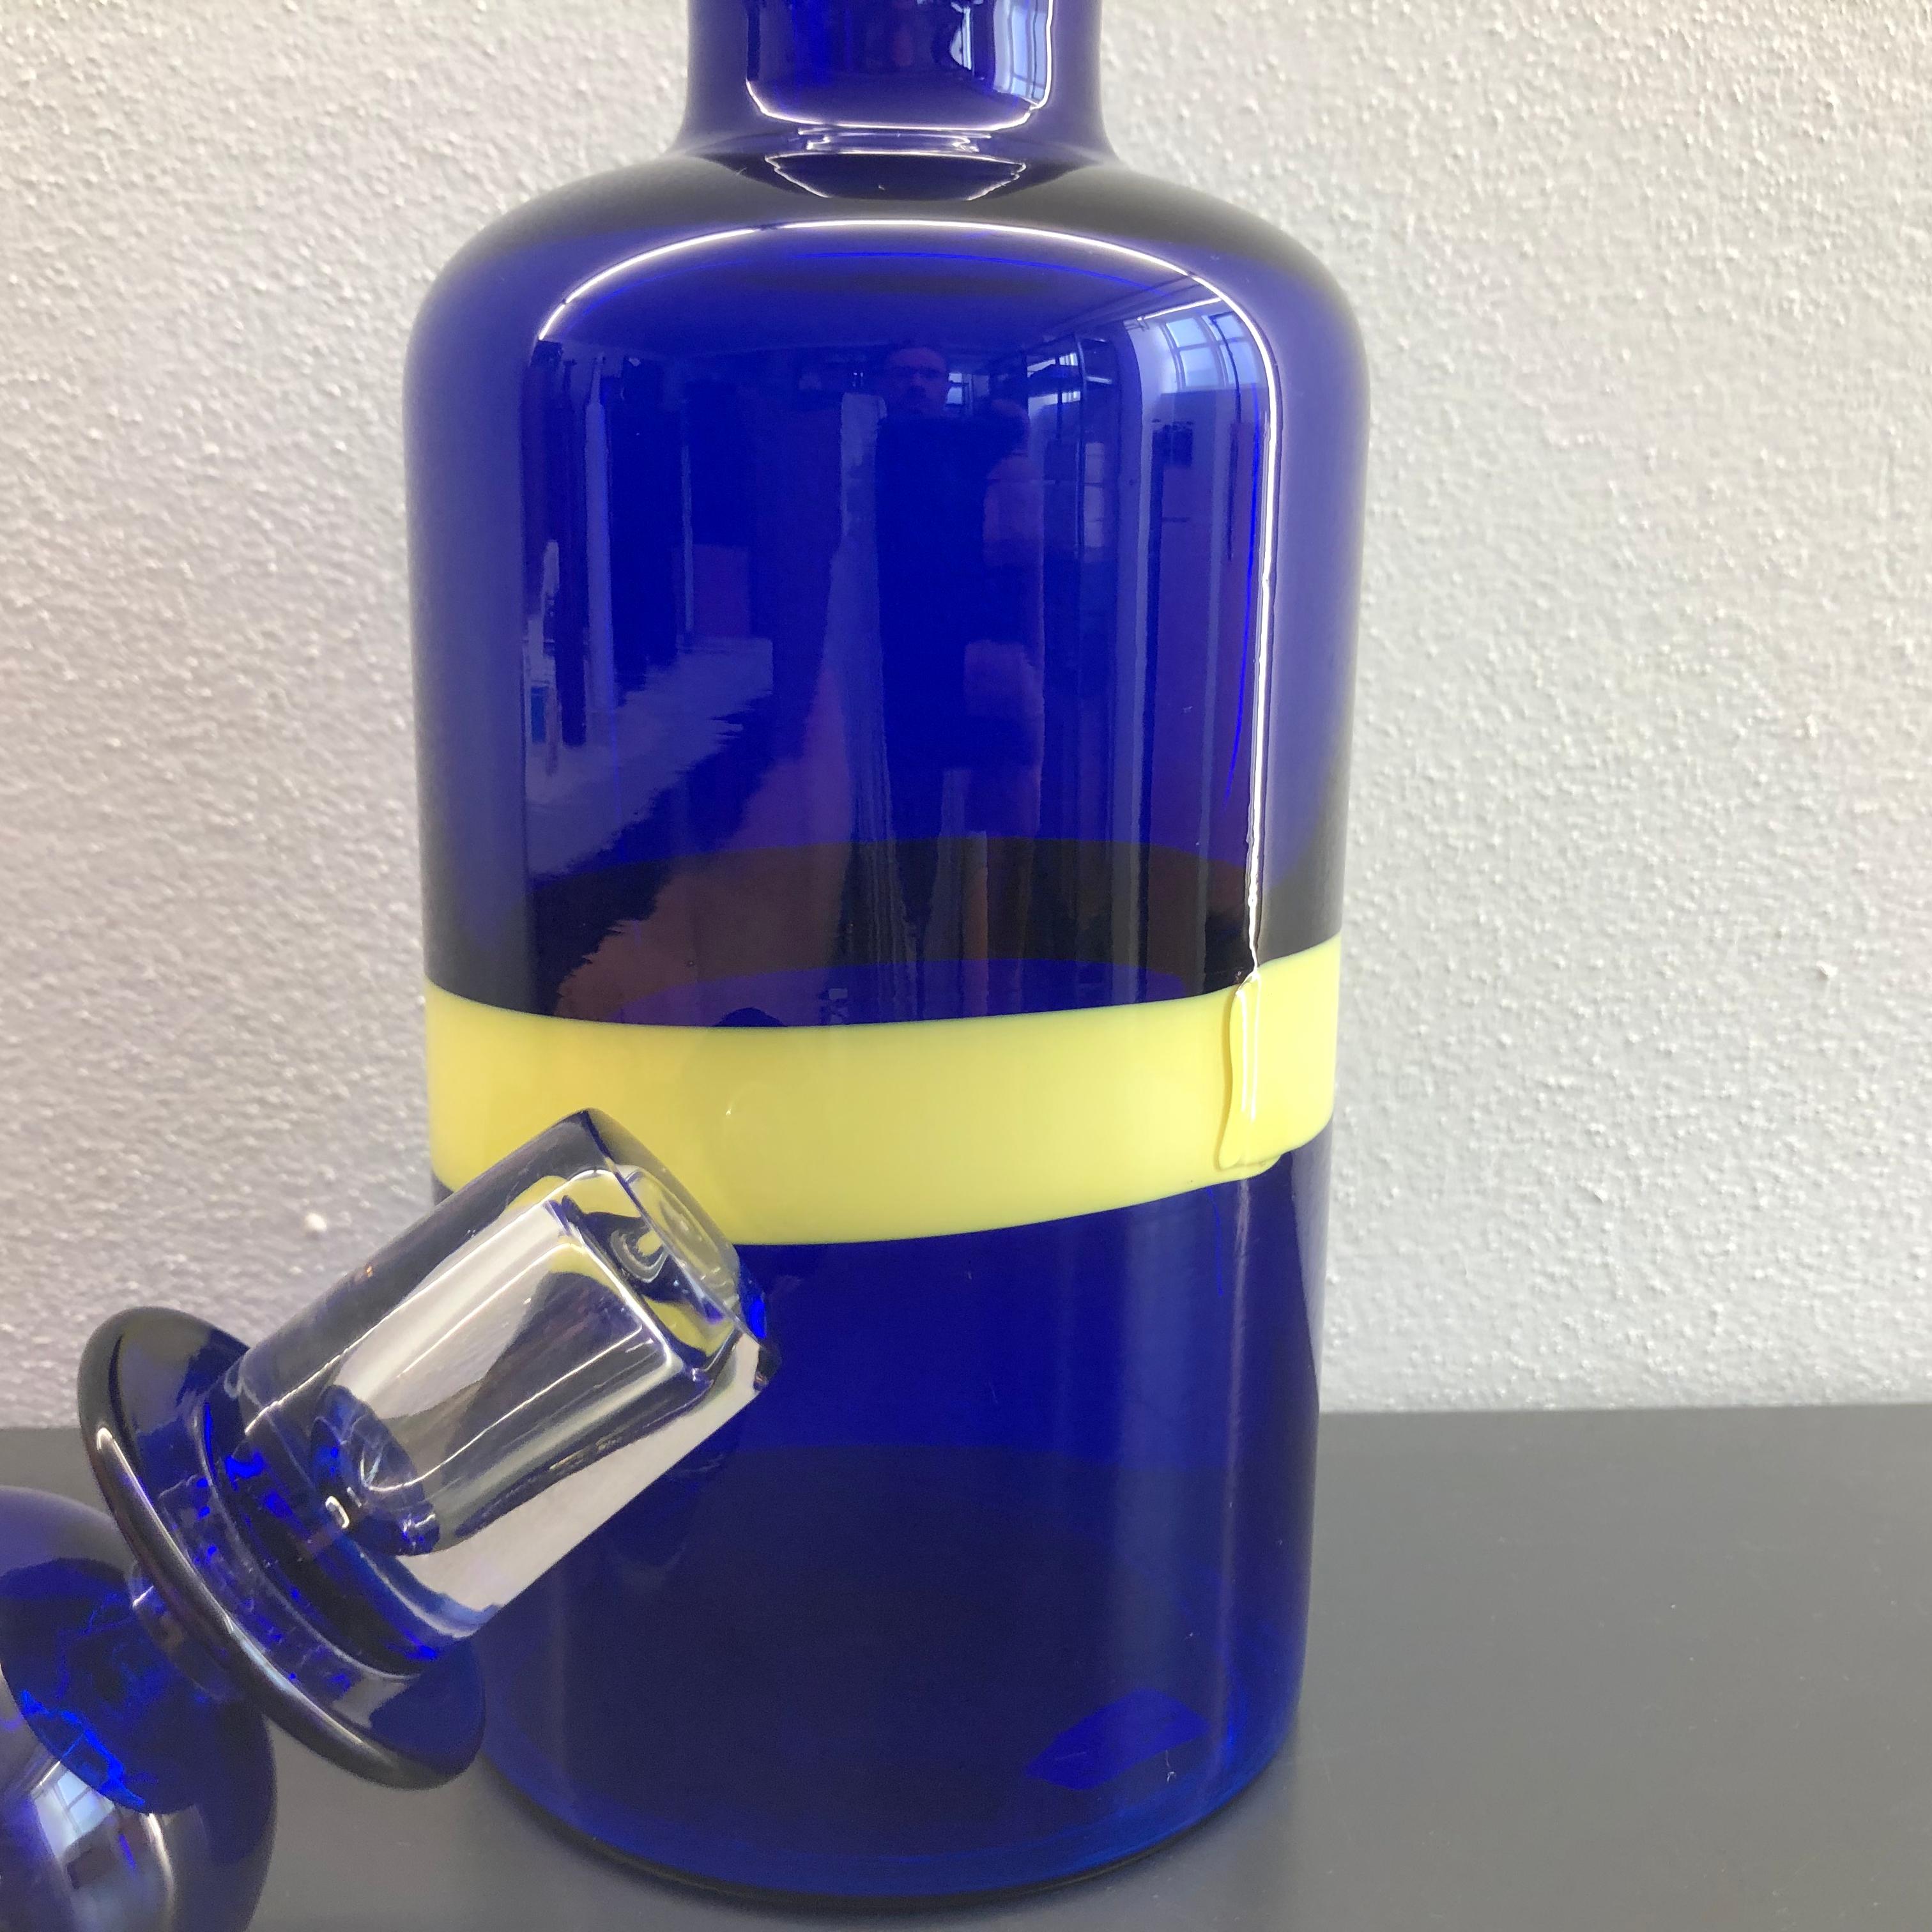 The decanter is decorated with a yellow robbin on the deep blue base, a classical 